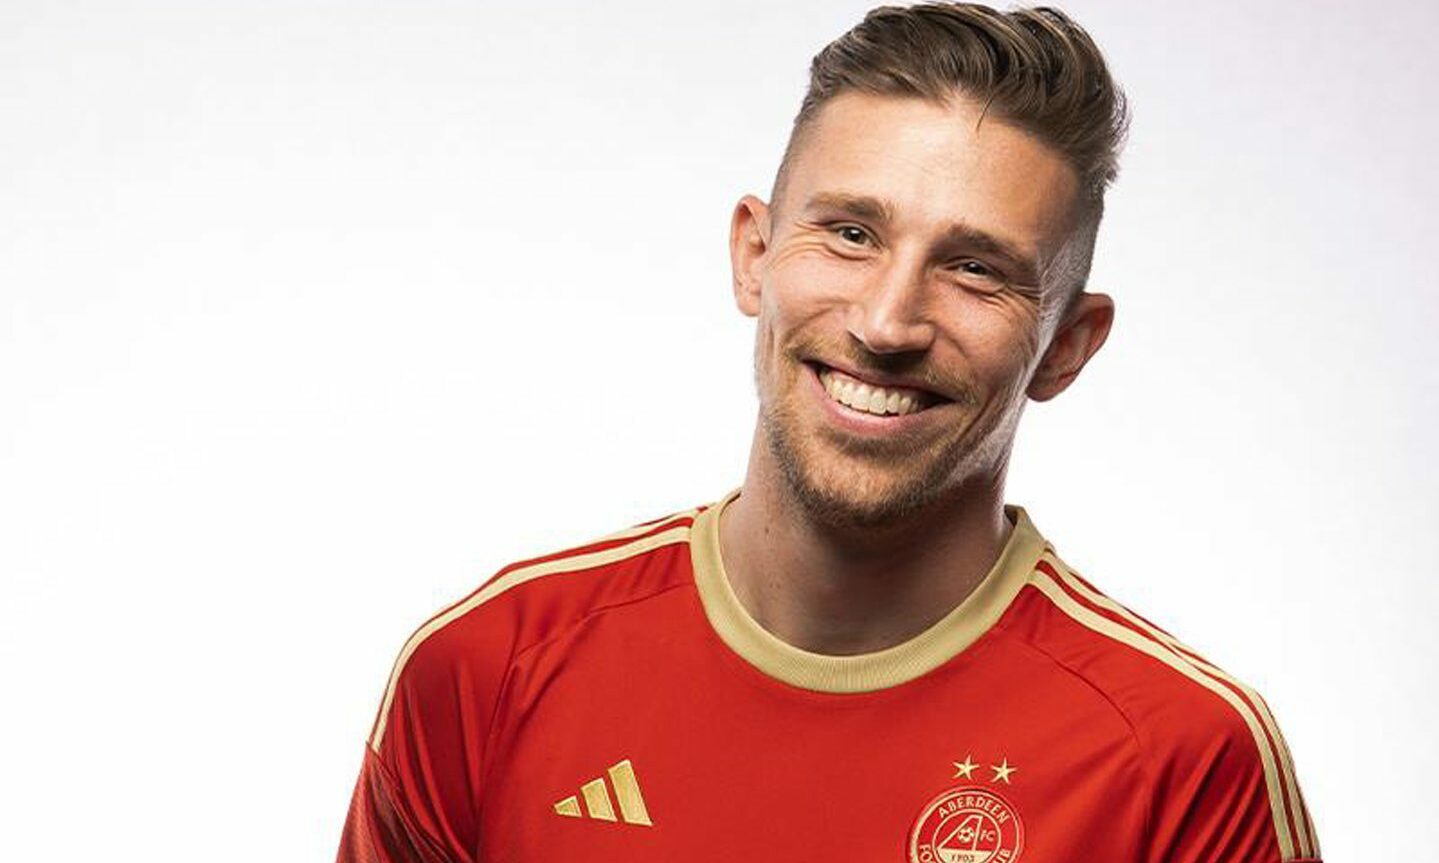 Angus MacDonald in Aberdeen's new home kit for the 2023/24 season.